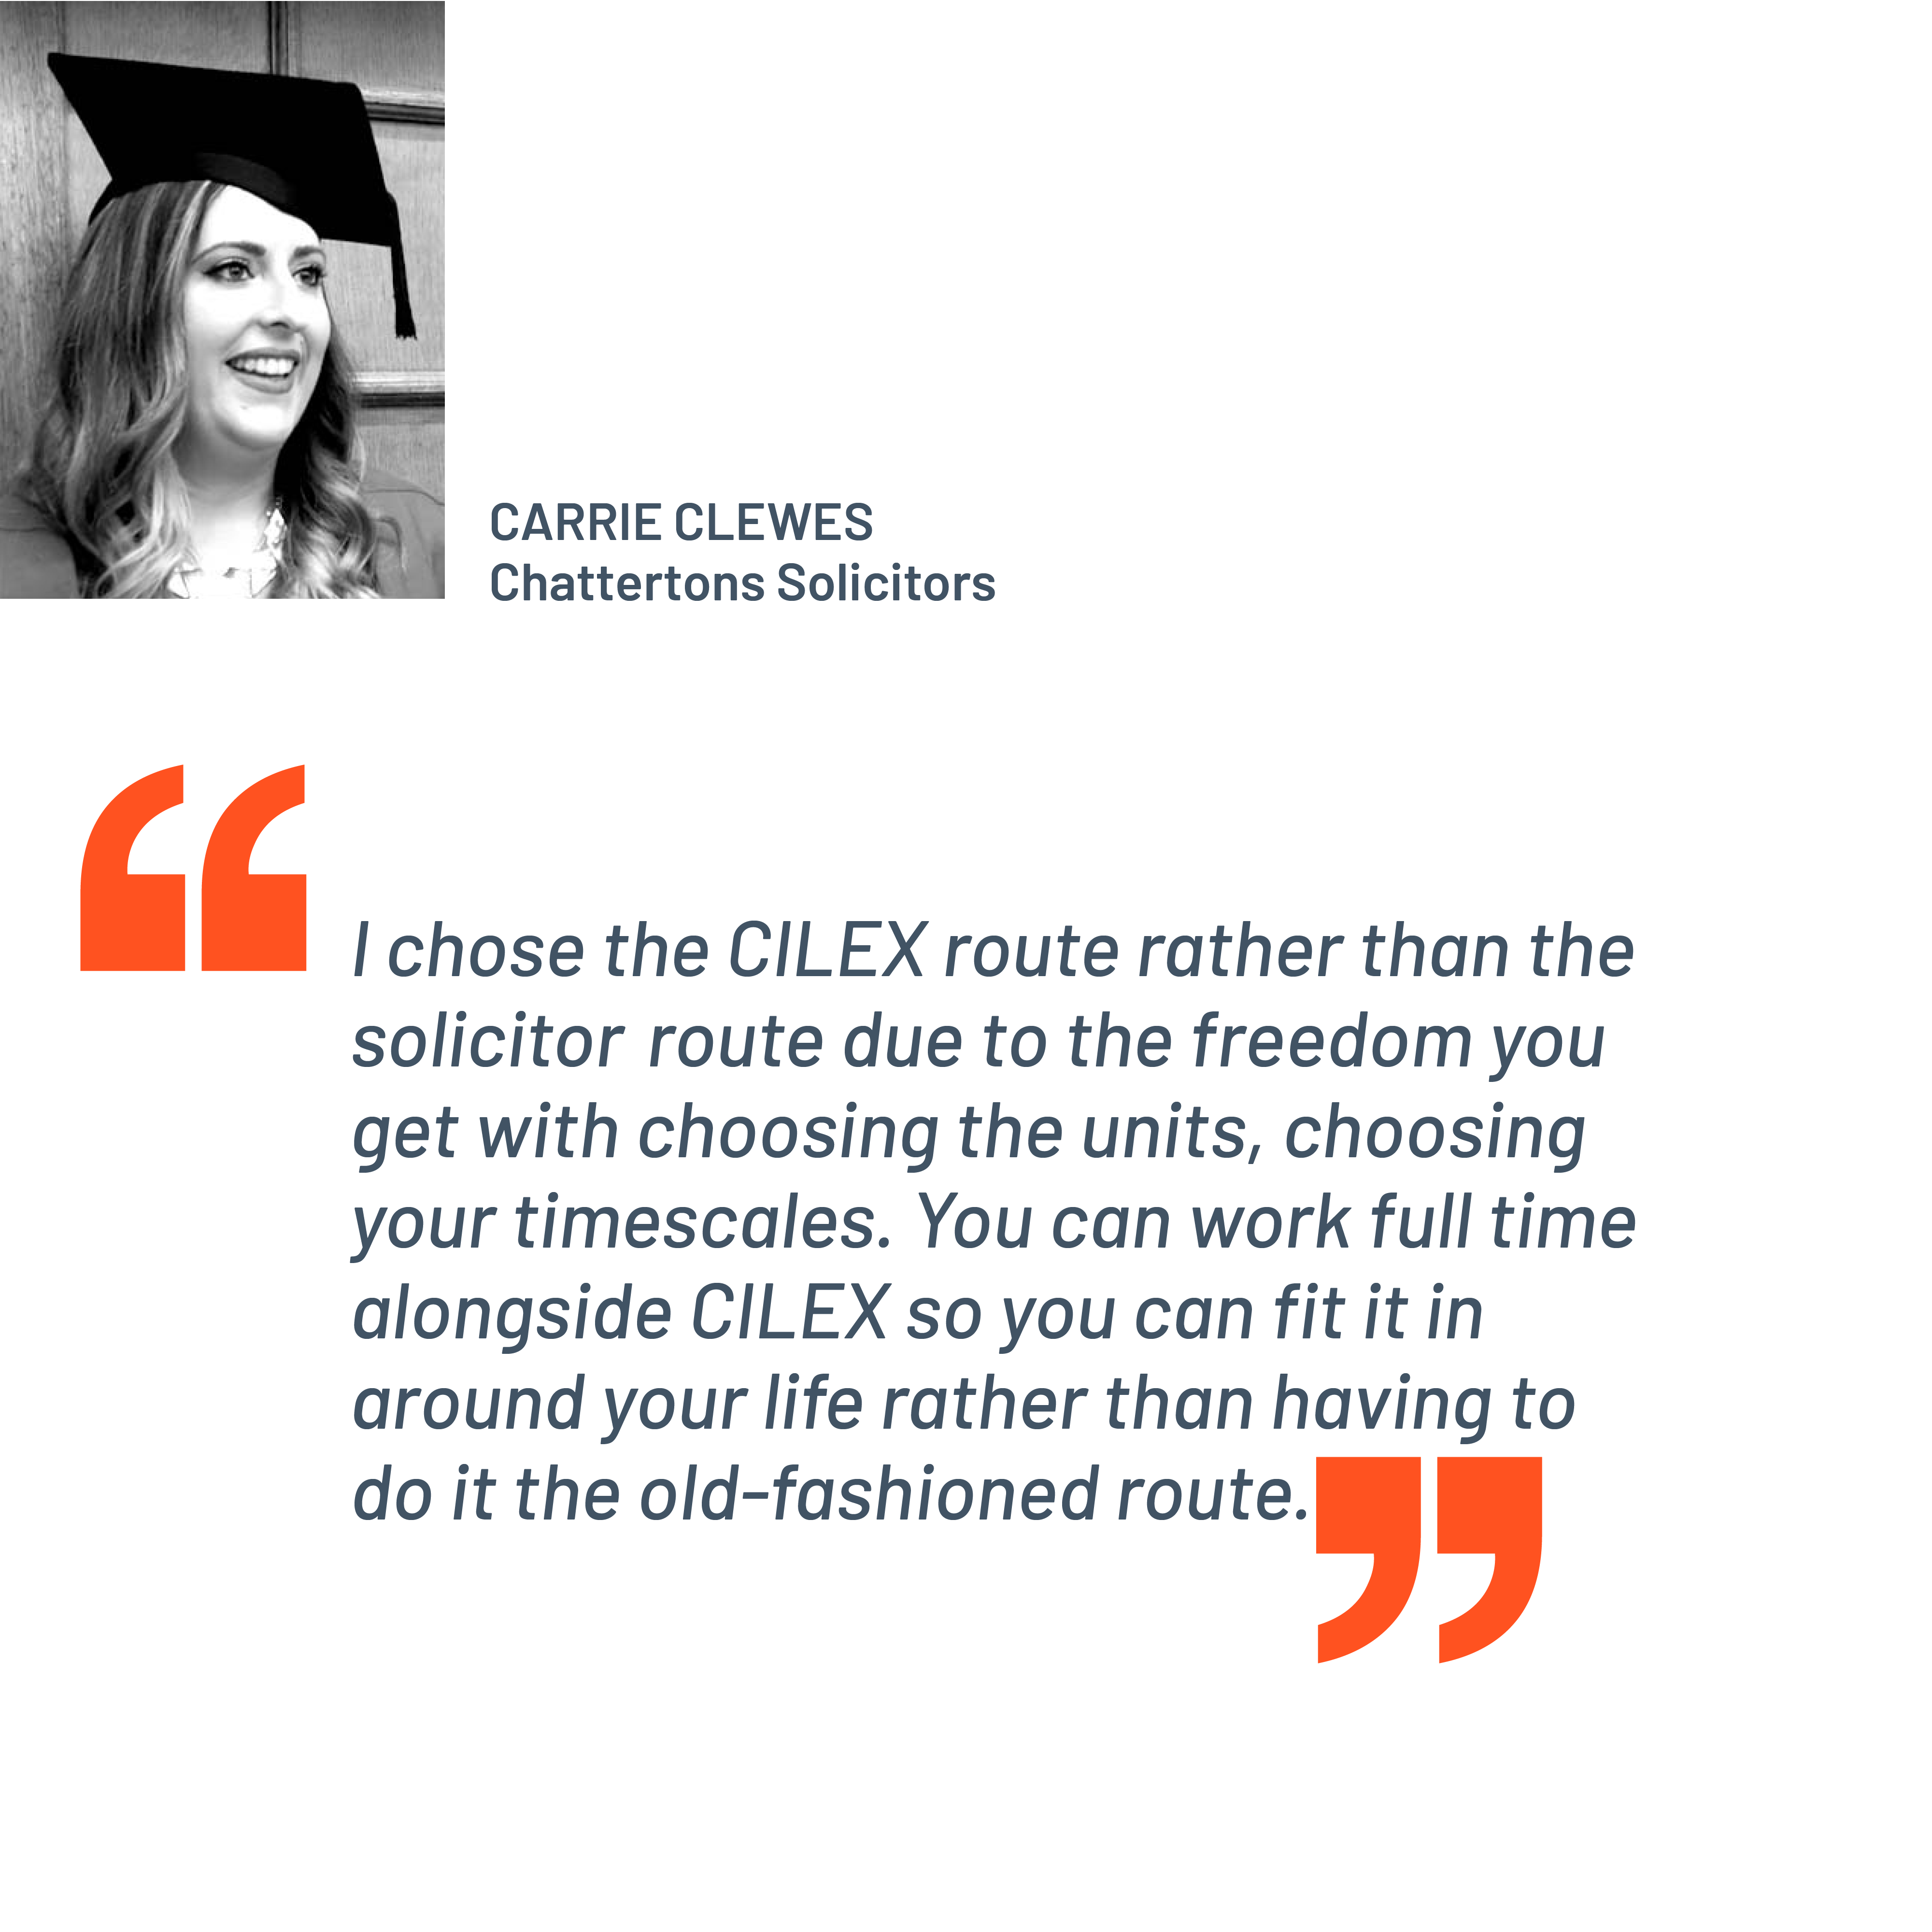 Quote from Carrie Clewes, Chattertons Solicitors. "I chose the CILEX route rather than the solicitor route due to the freedom you get with choosing the units, choosing your timescales. You can work full time alongside CILEX so you can fit it in around your life rather than having to do it the old-fashioned route."